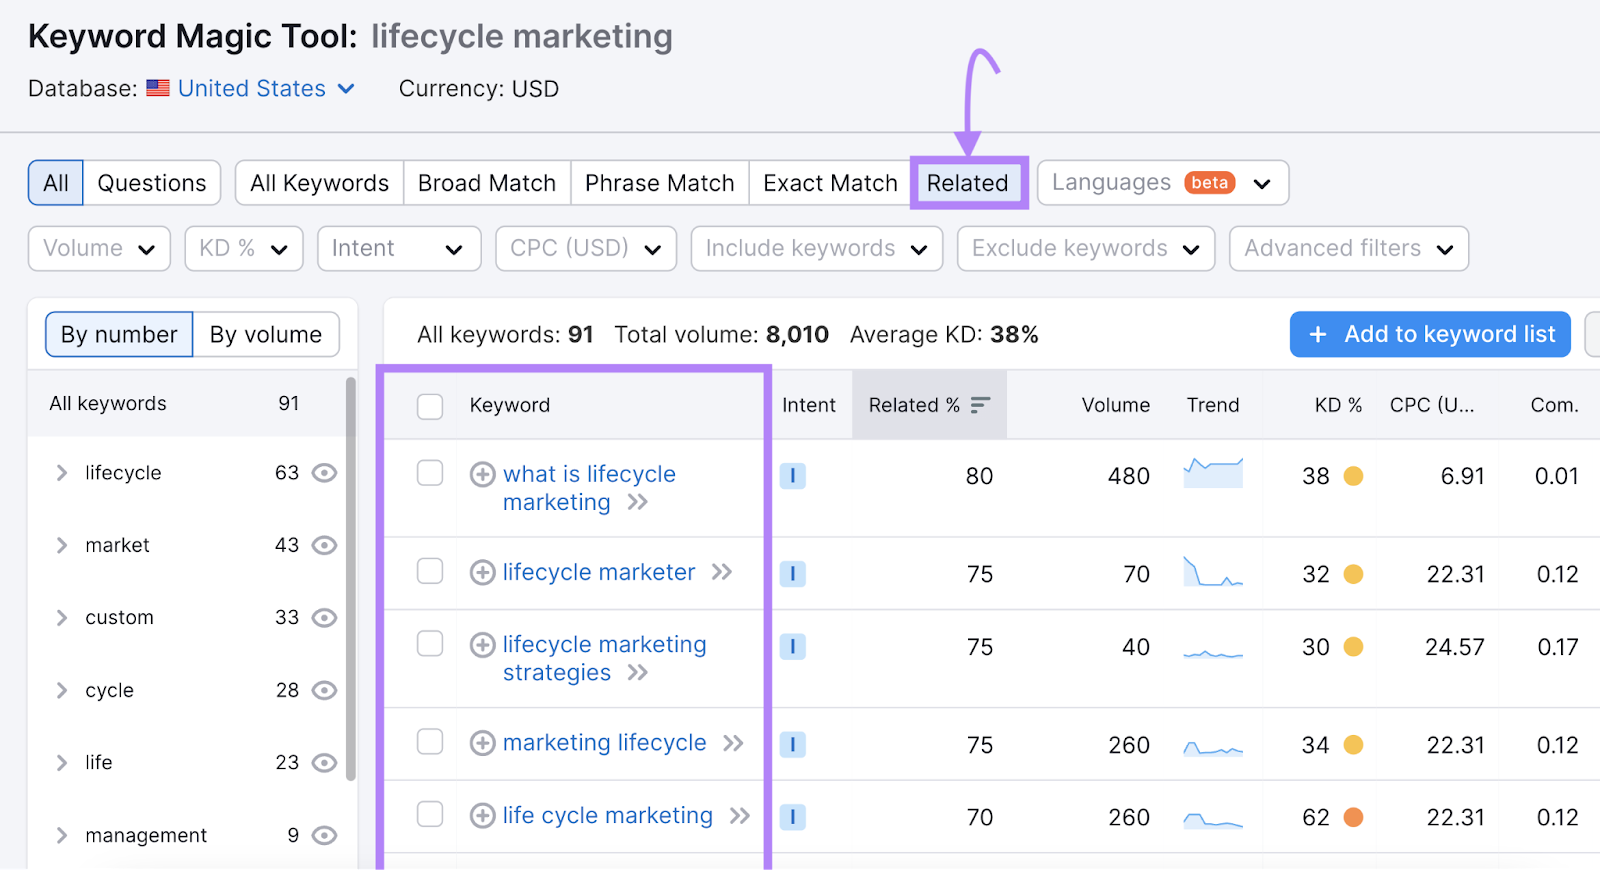 “lifecycle marketing" related keywords list